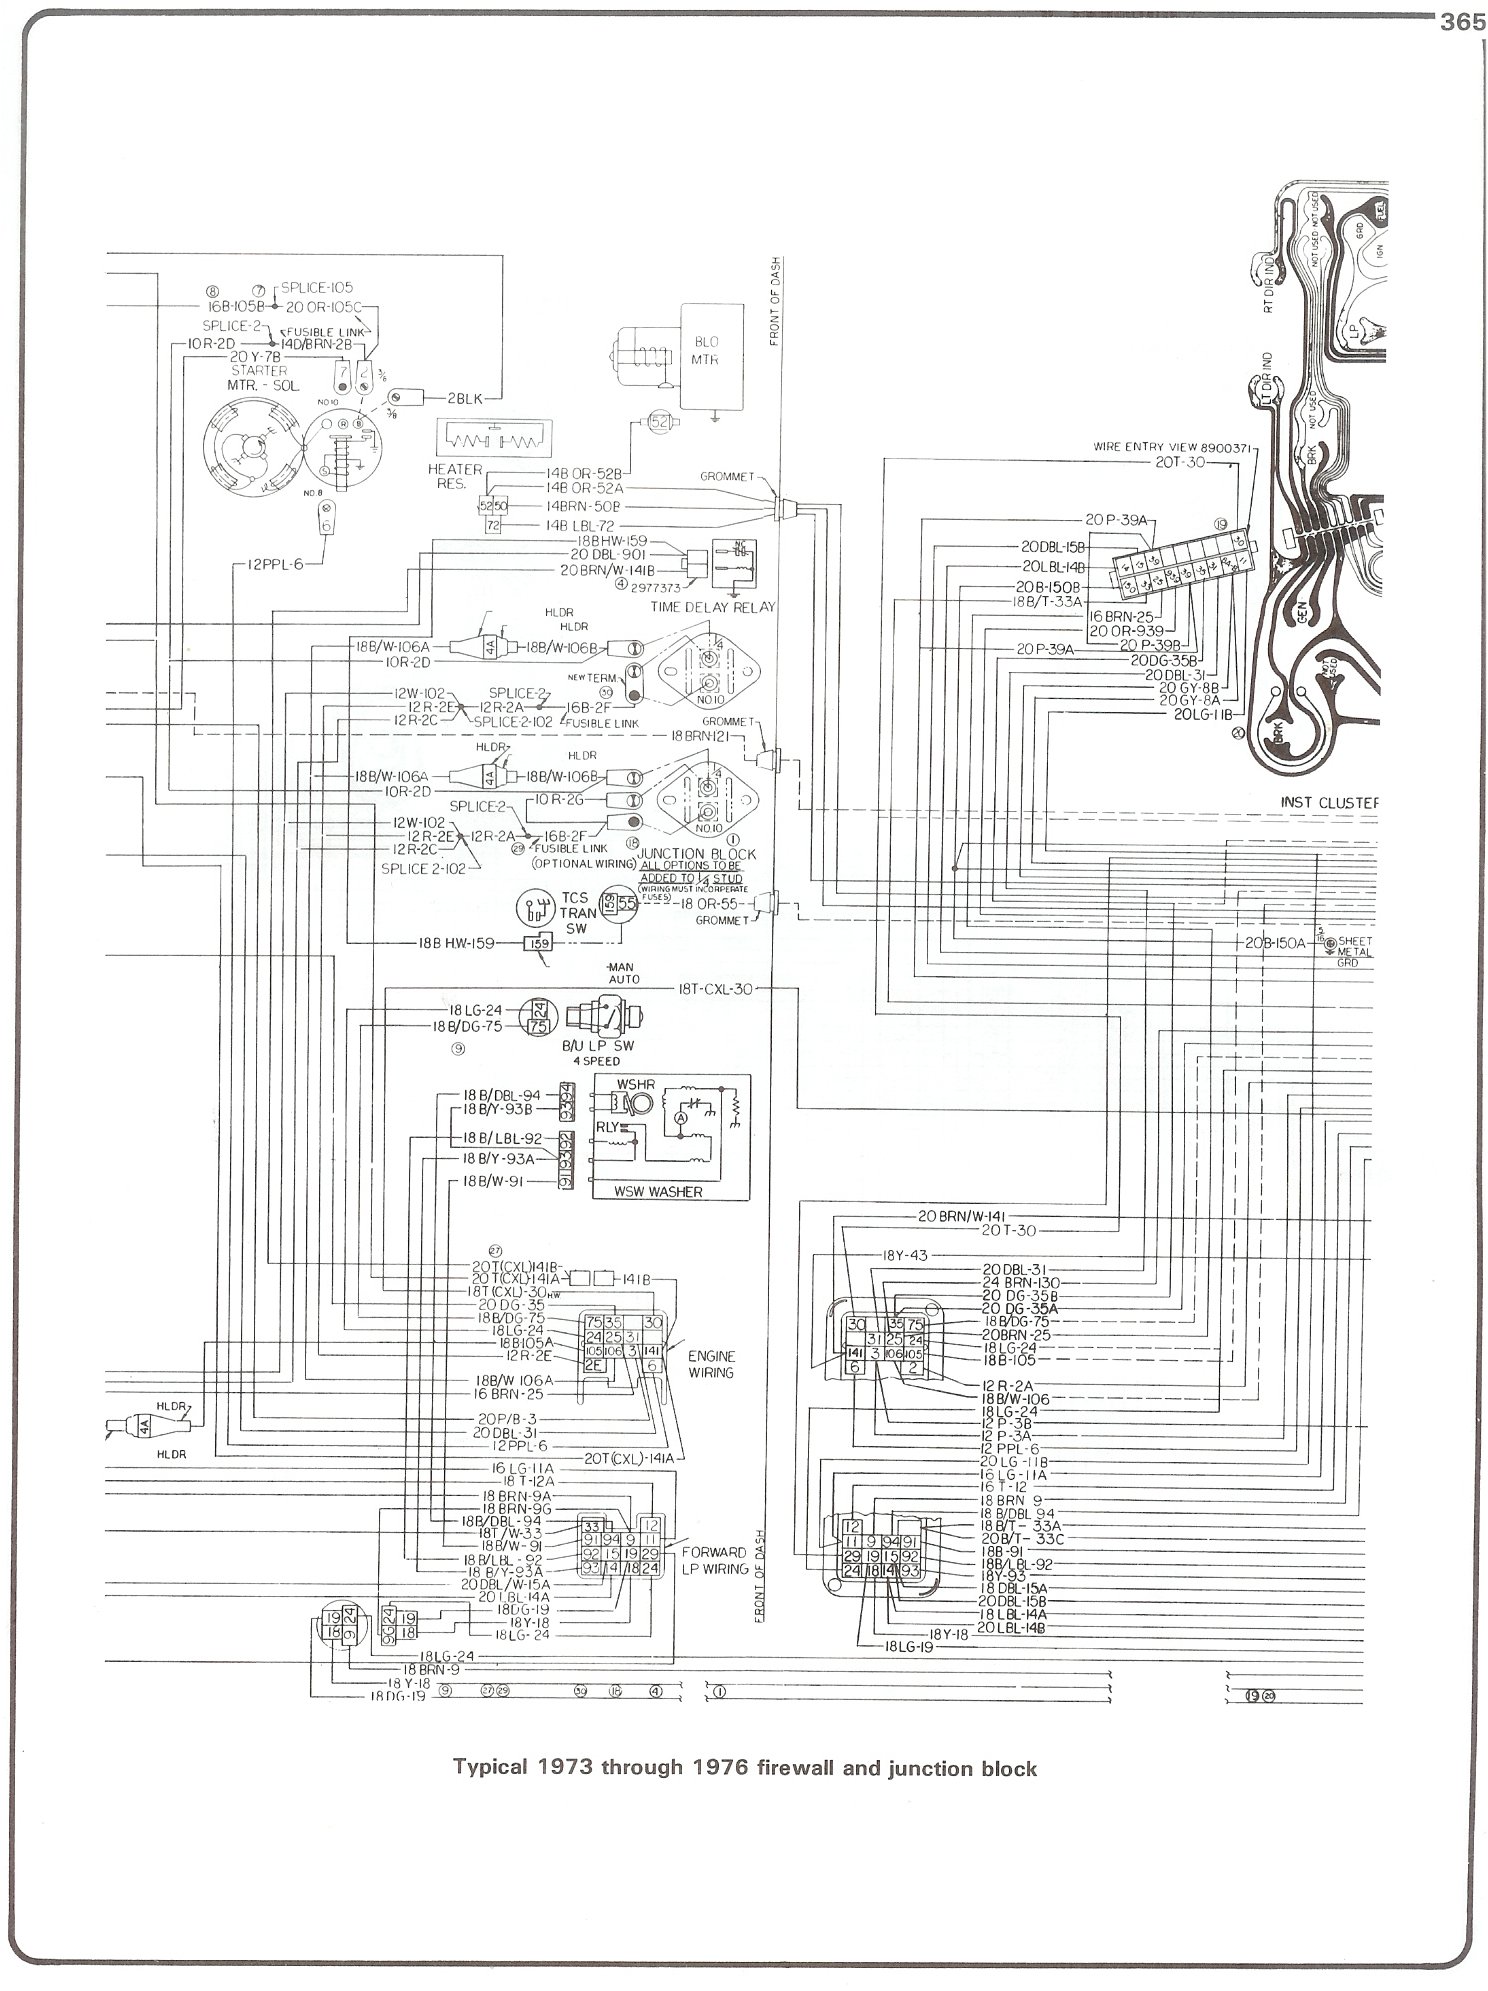 73-87 chevy truck wiring diagram manual